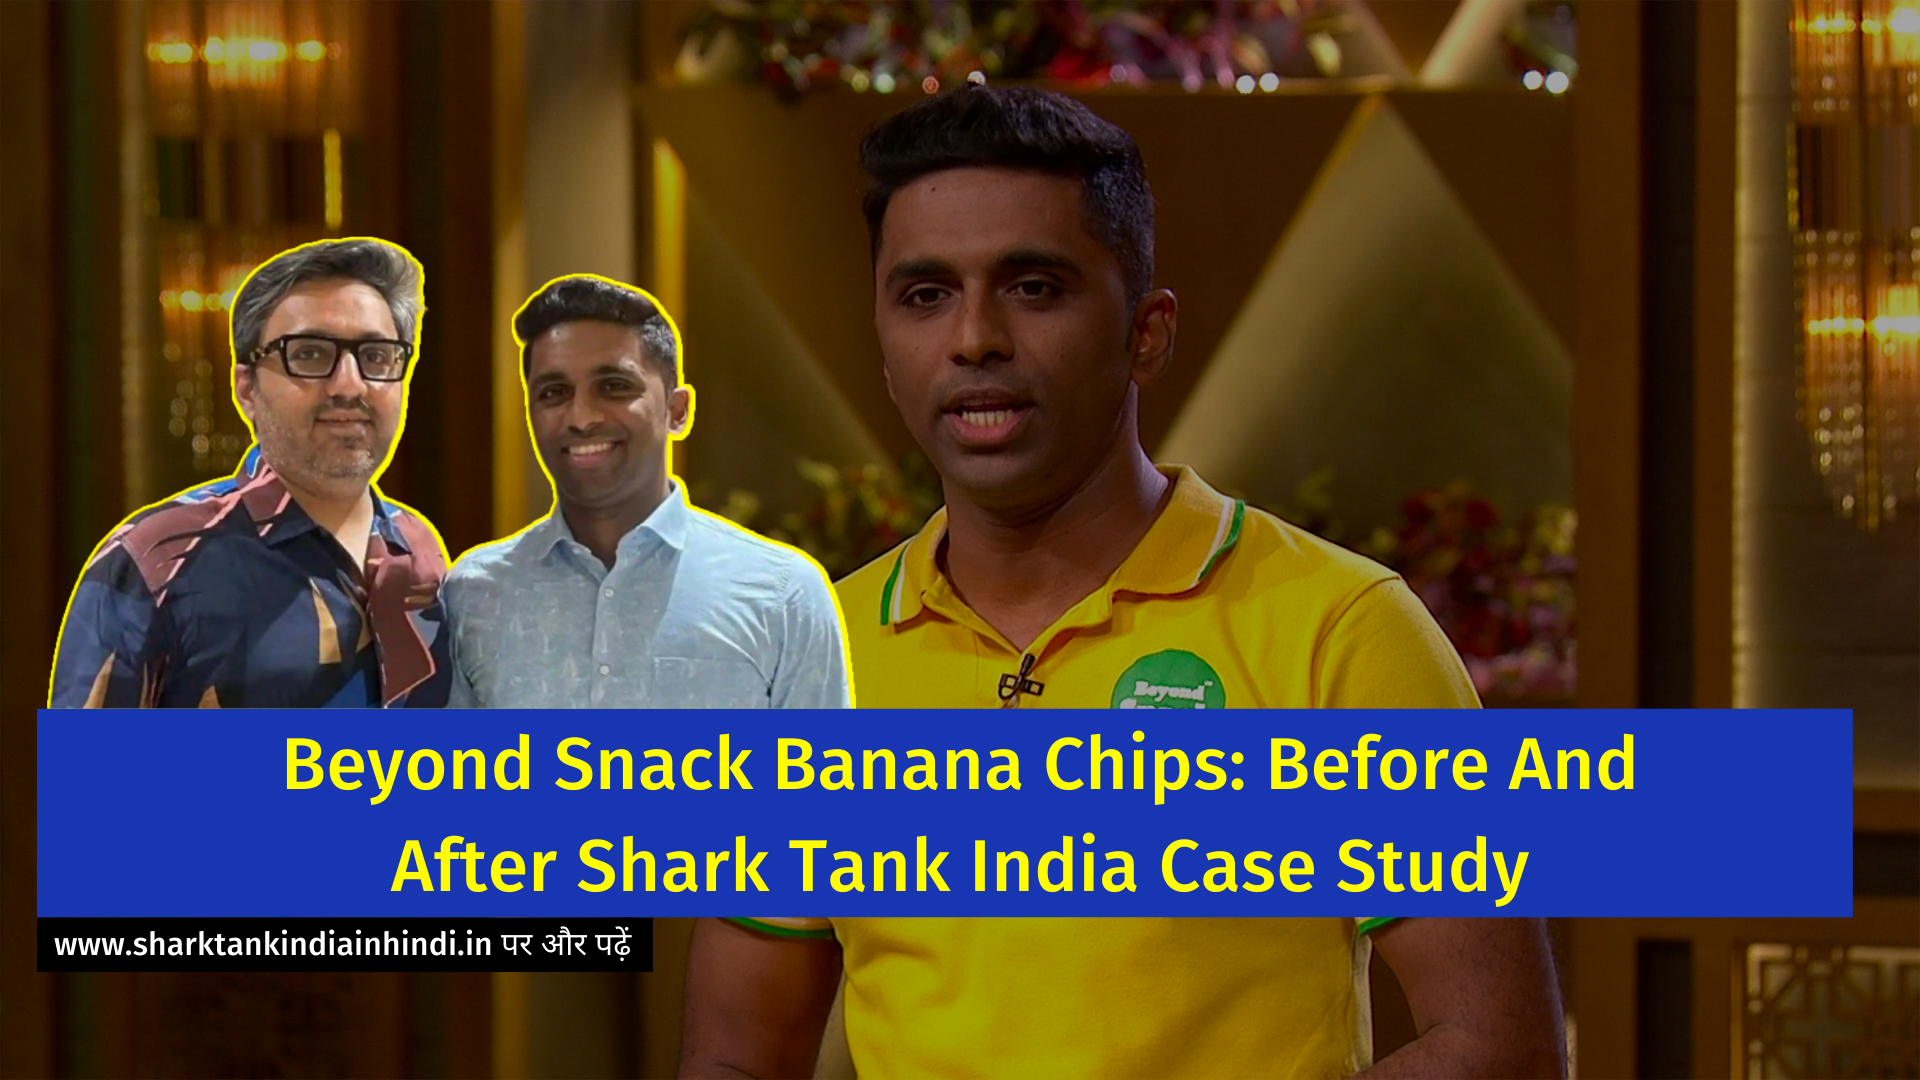 Beyond Snack Banana Chips: Before And After Shark Tank India Case Study